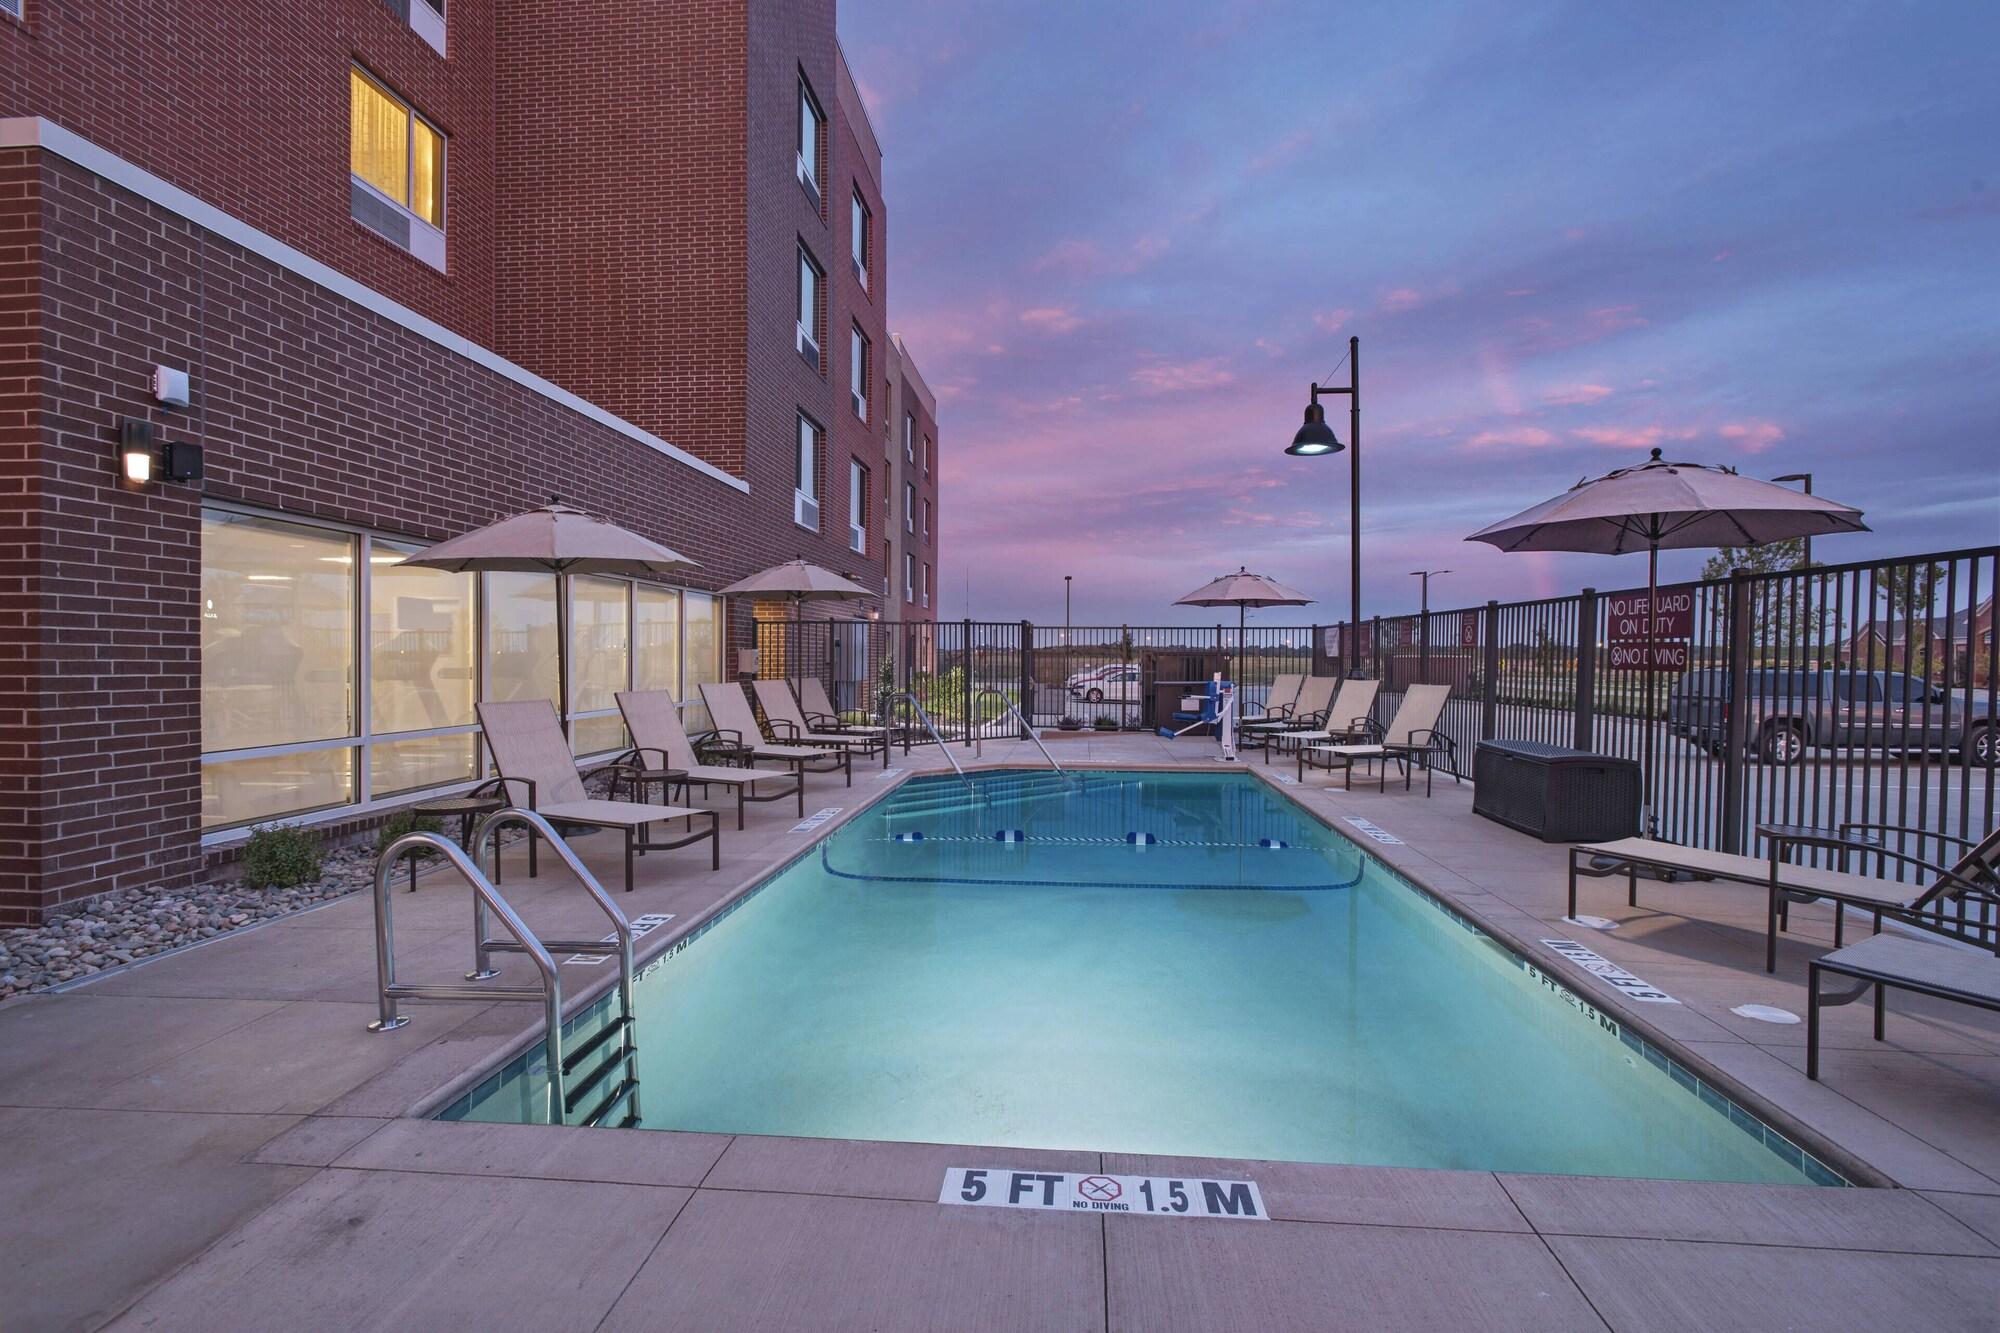 TownePlace Suites by Marriott Columbia image